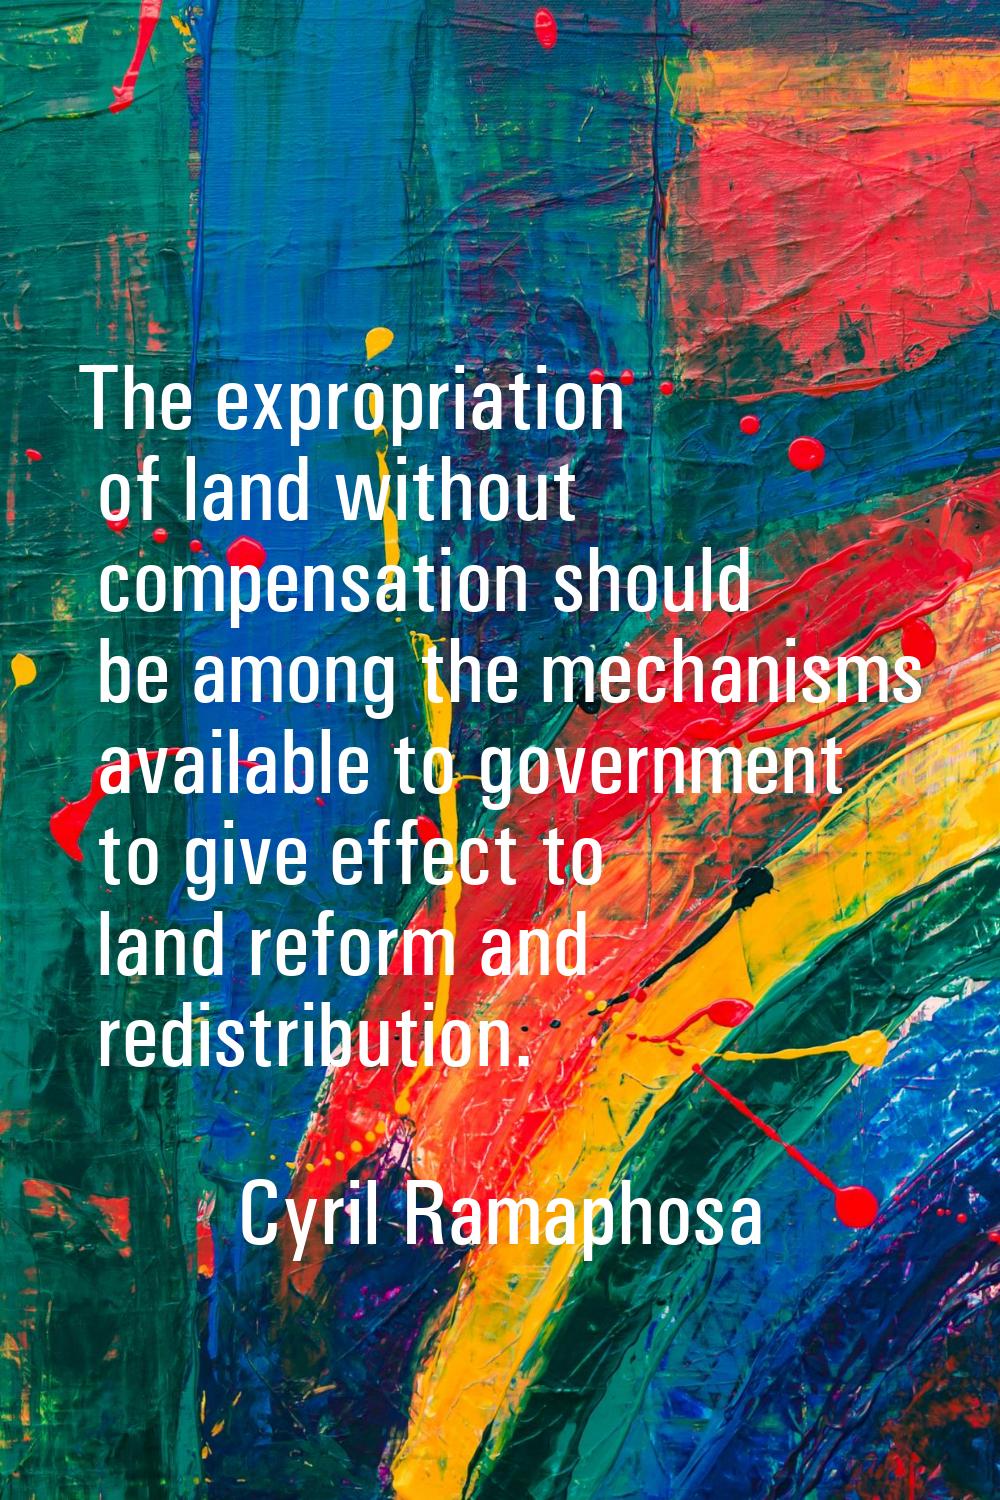 The expropriation of land without compensation should be among the mechanisms available to governme